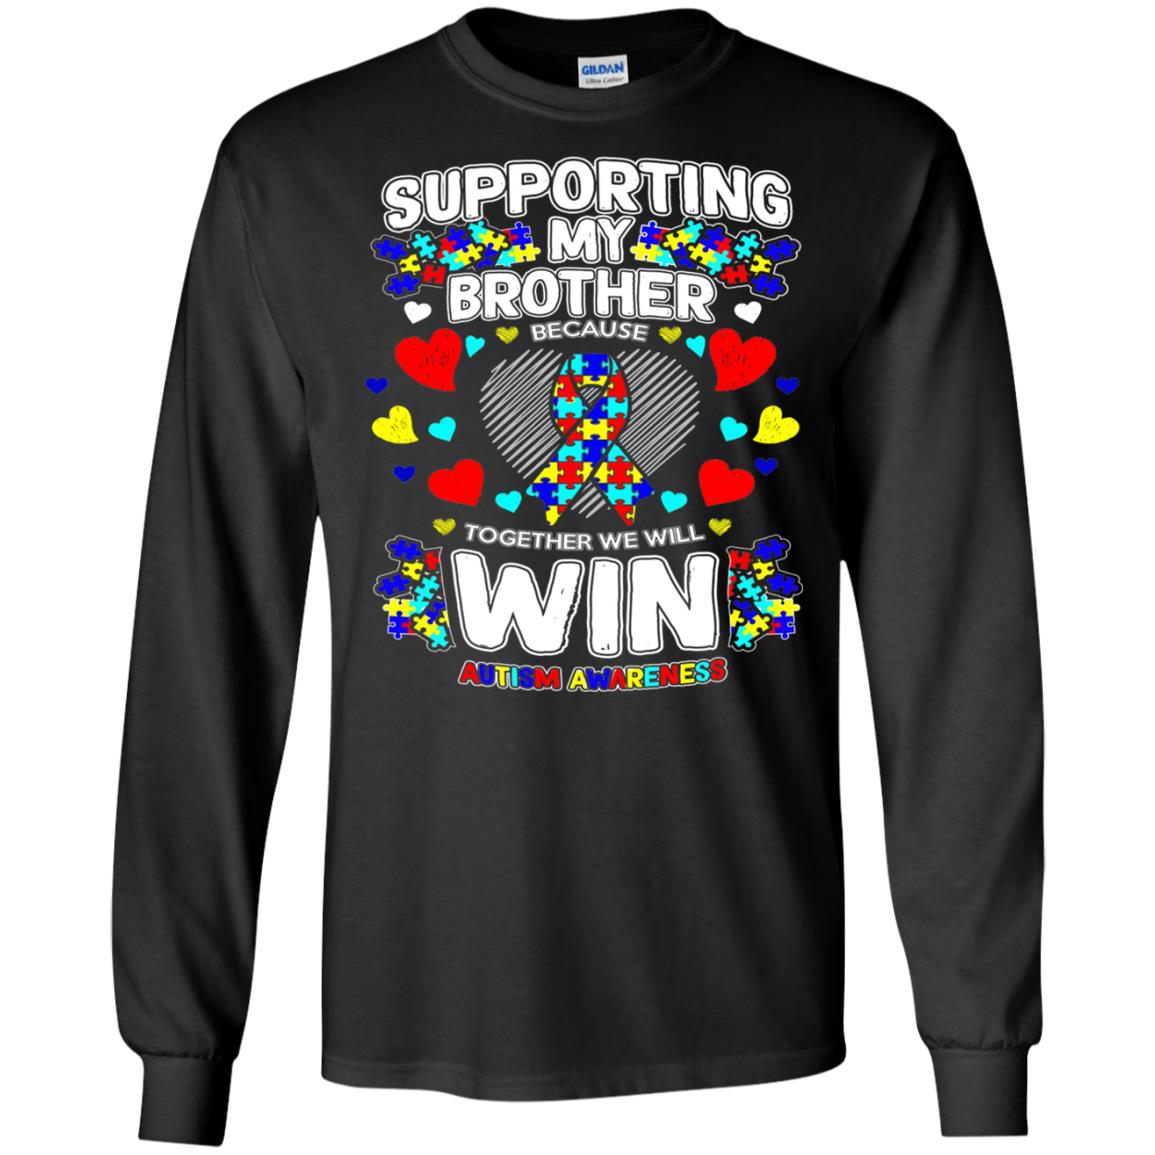 Autism Awareness Shirts For Supporting My Brother